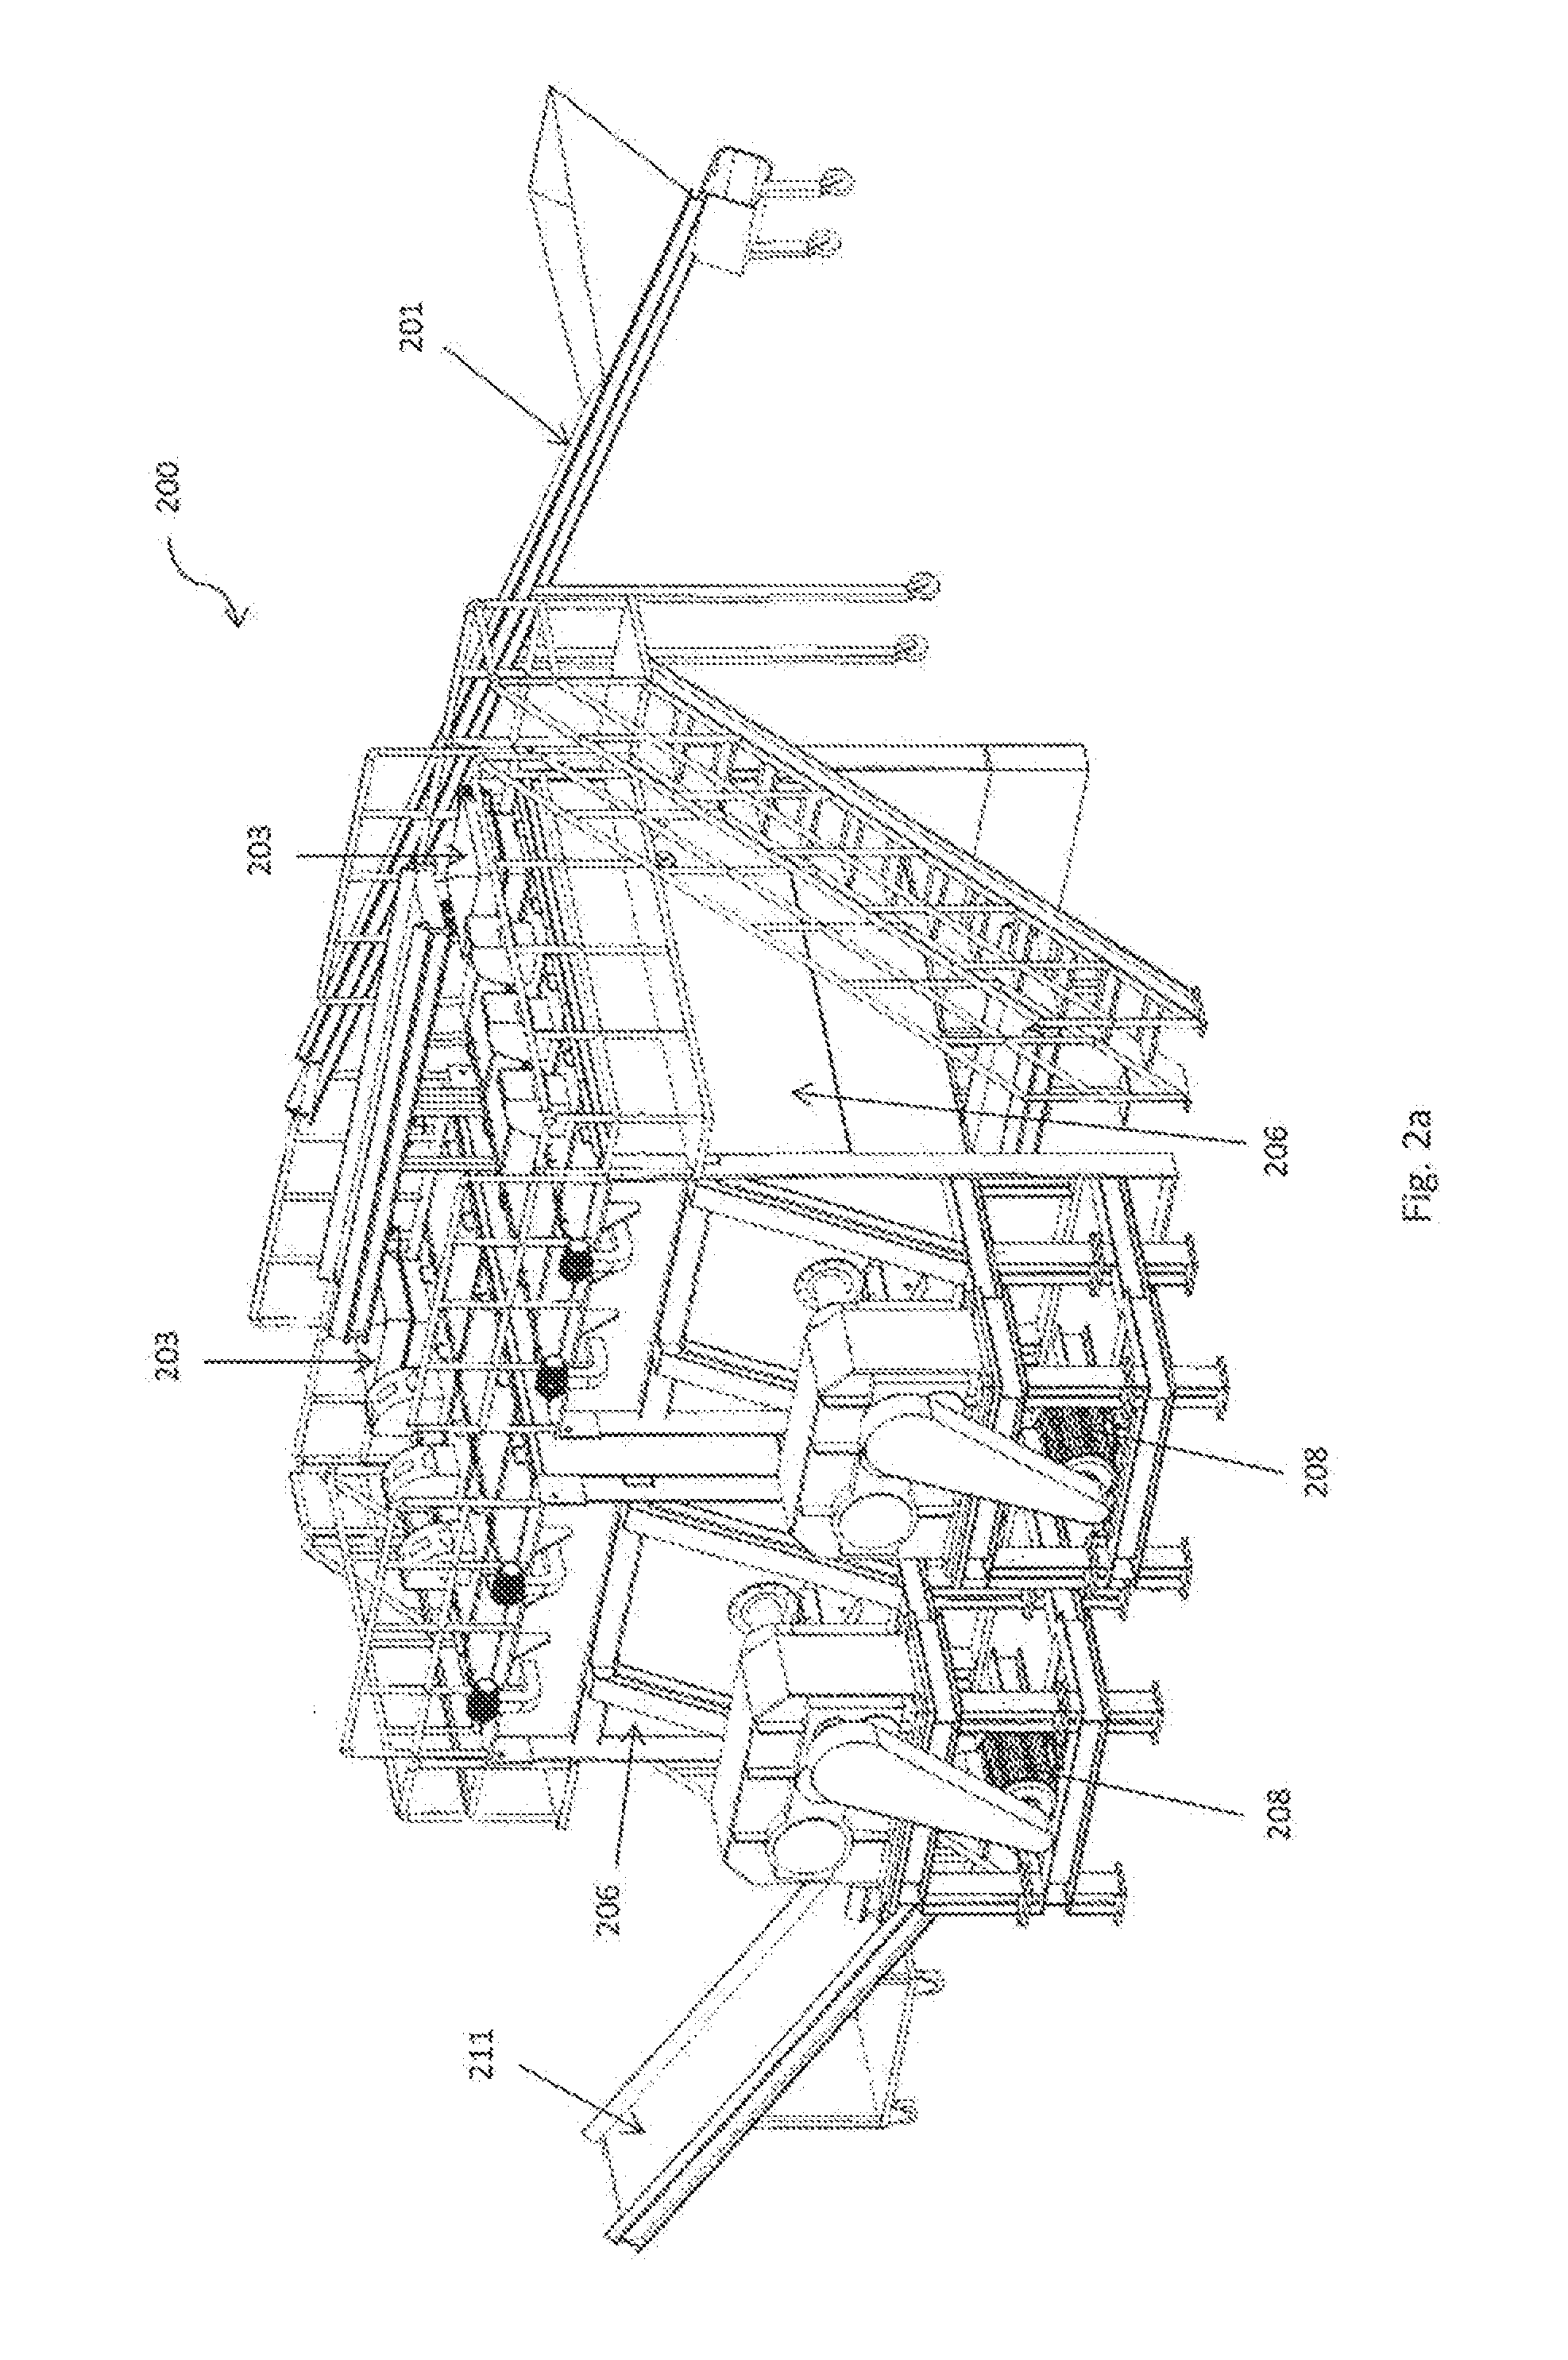 Apparatus and System for Treating Organic Mass